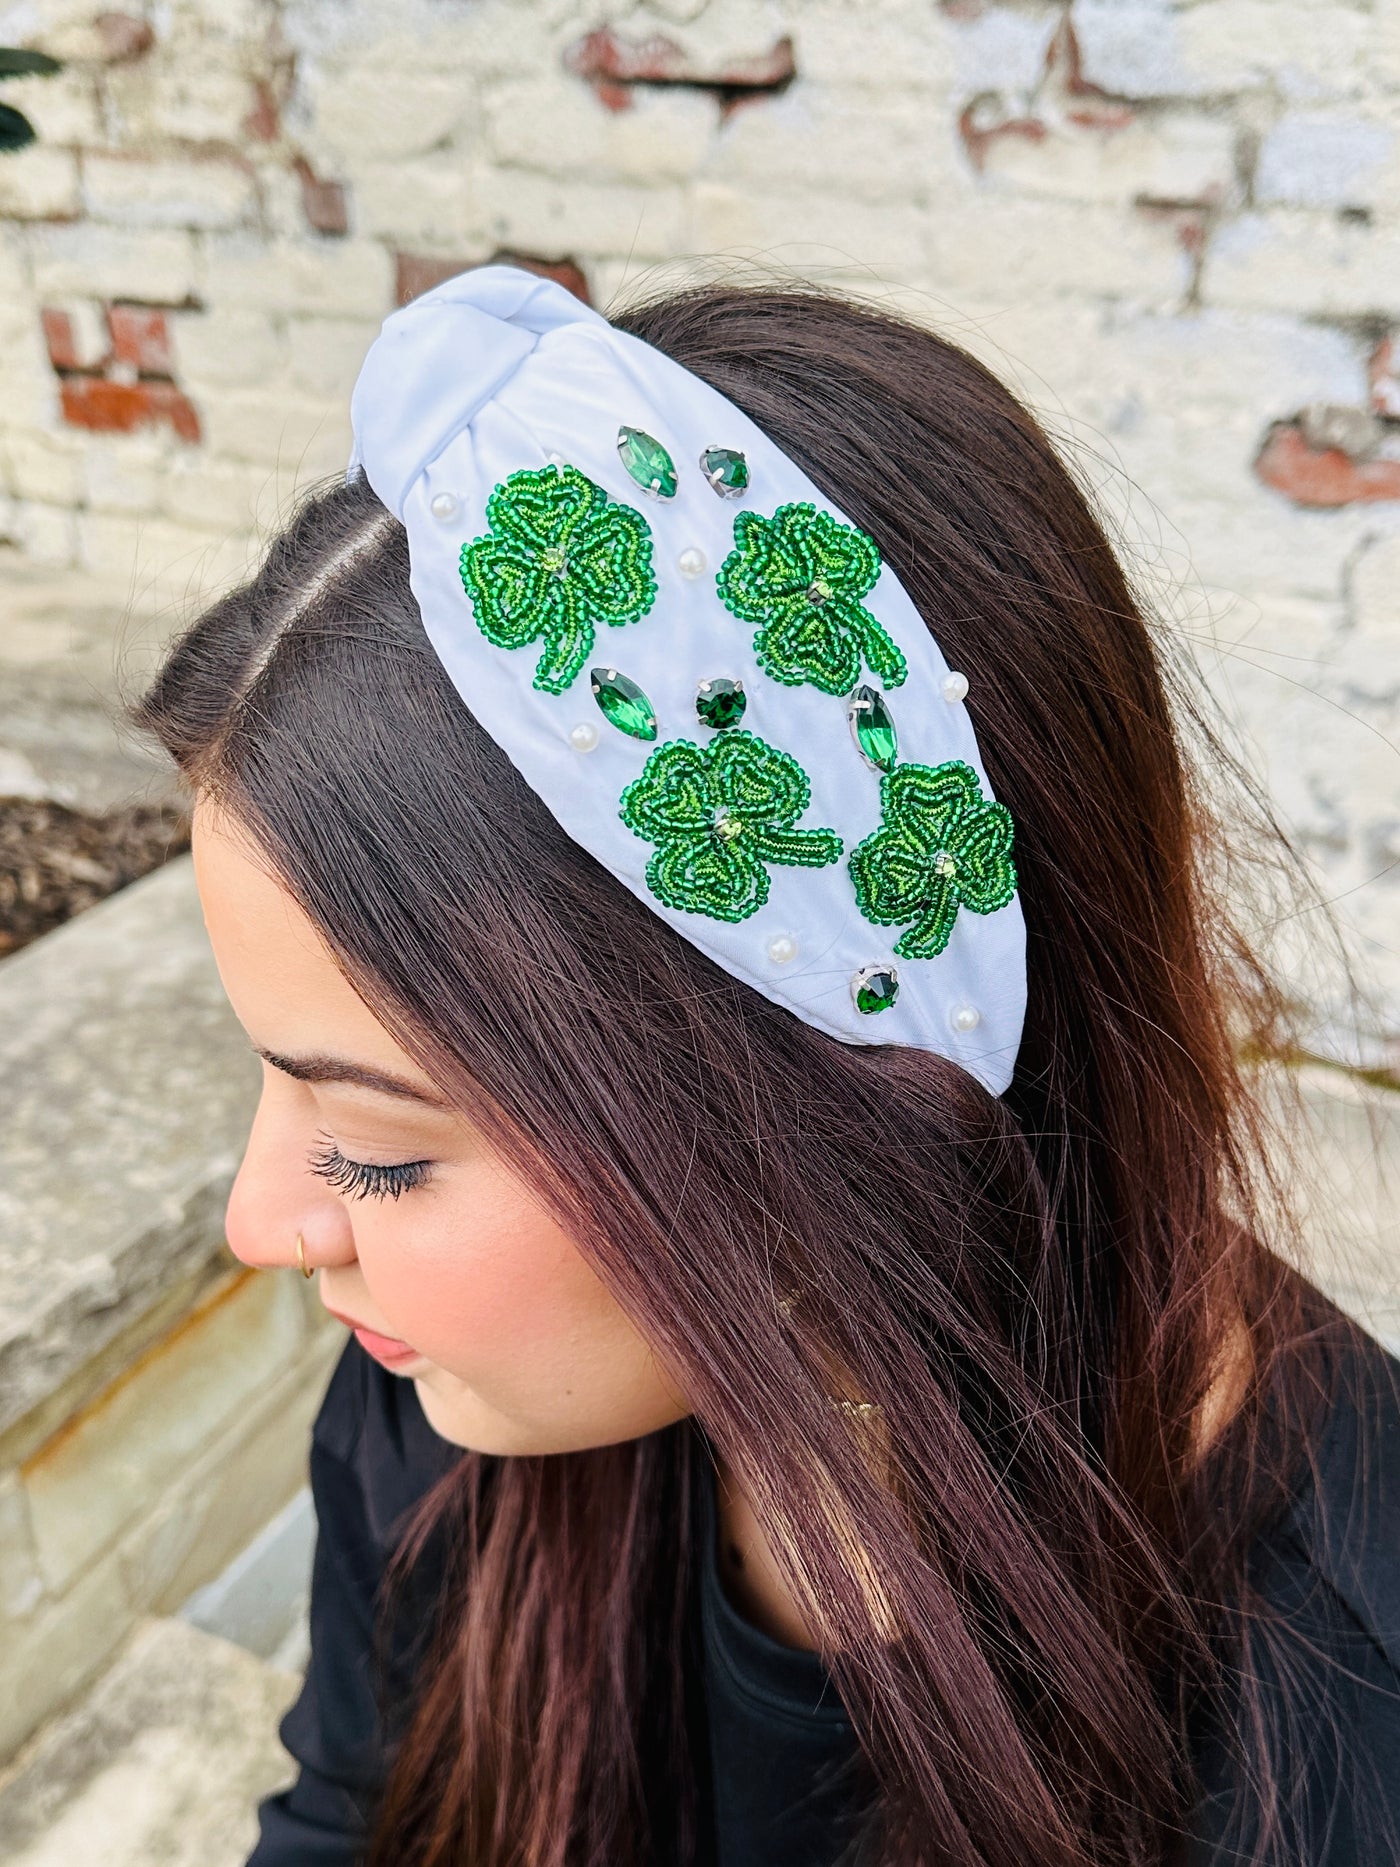 Luckiest Girl Embellished Headband • White-DMC-Shop Anchored Bliss Women's Boutique Clothing Store